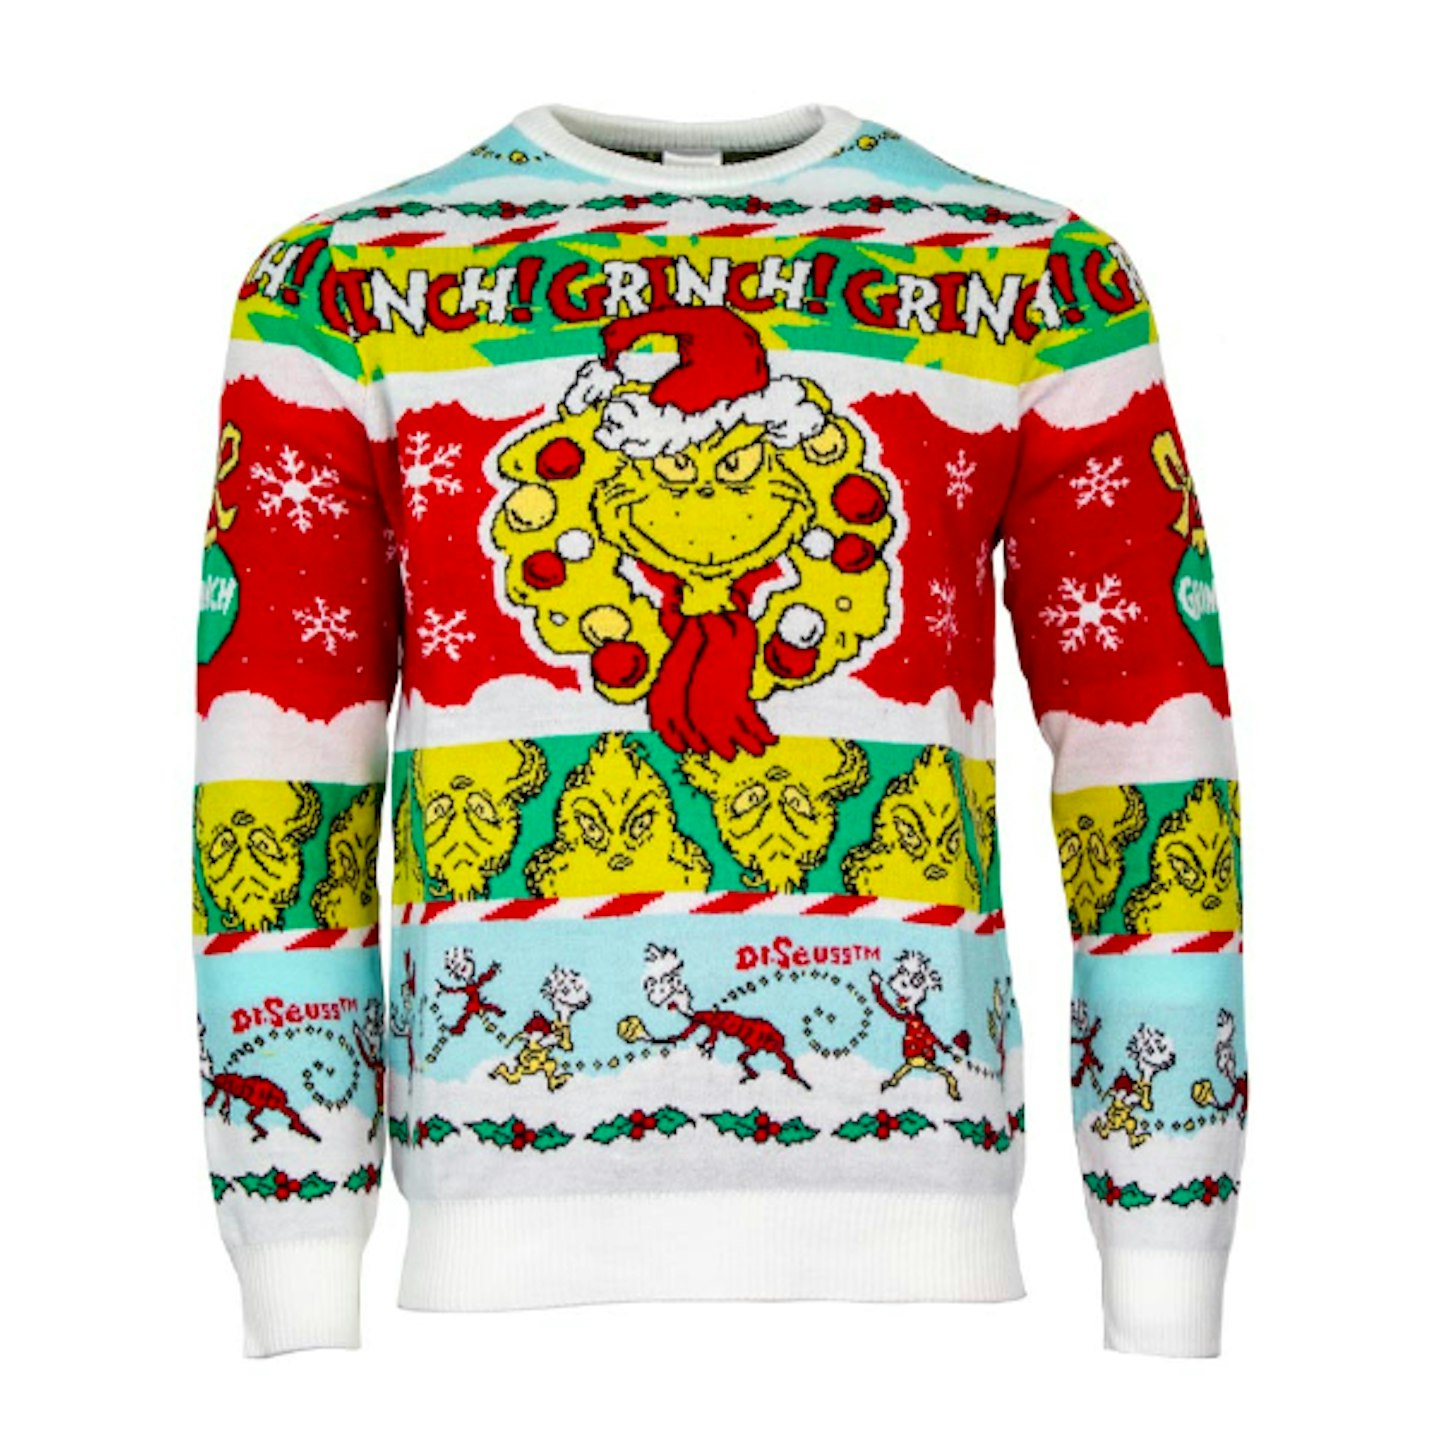 The Grinch Christmas Jumper